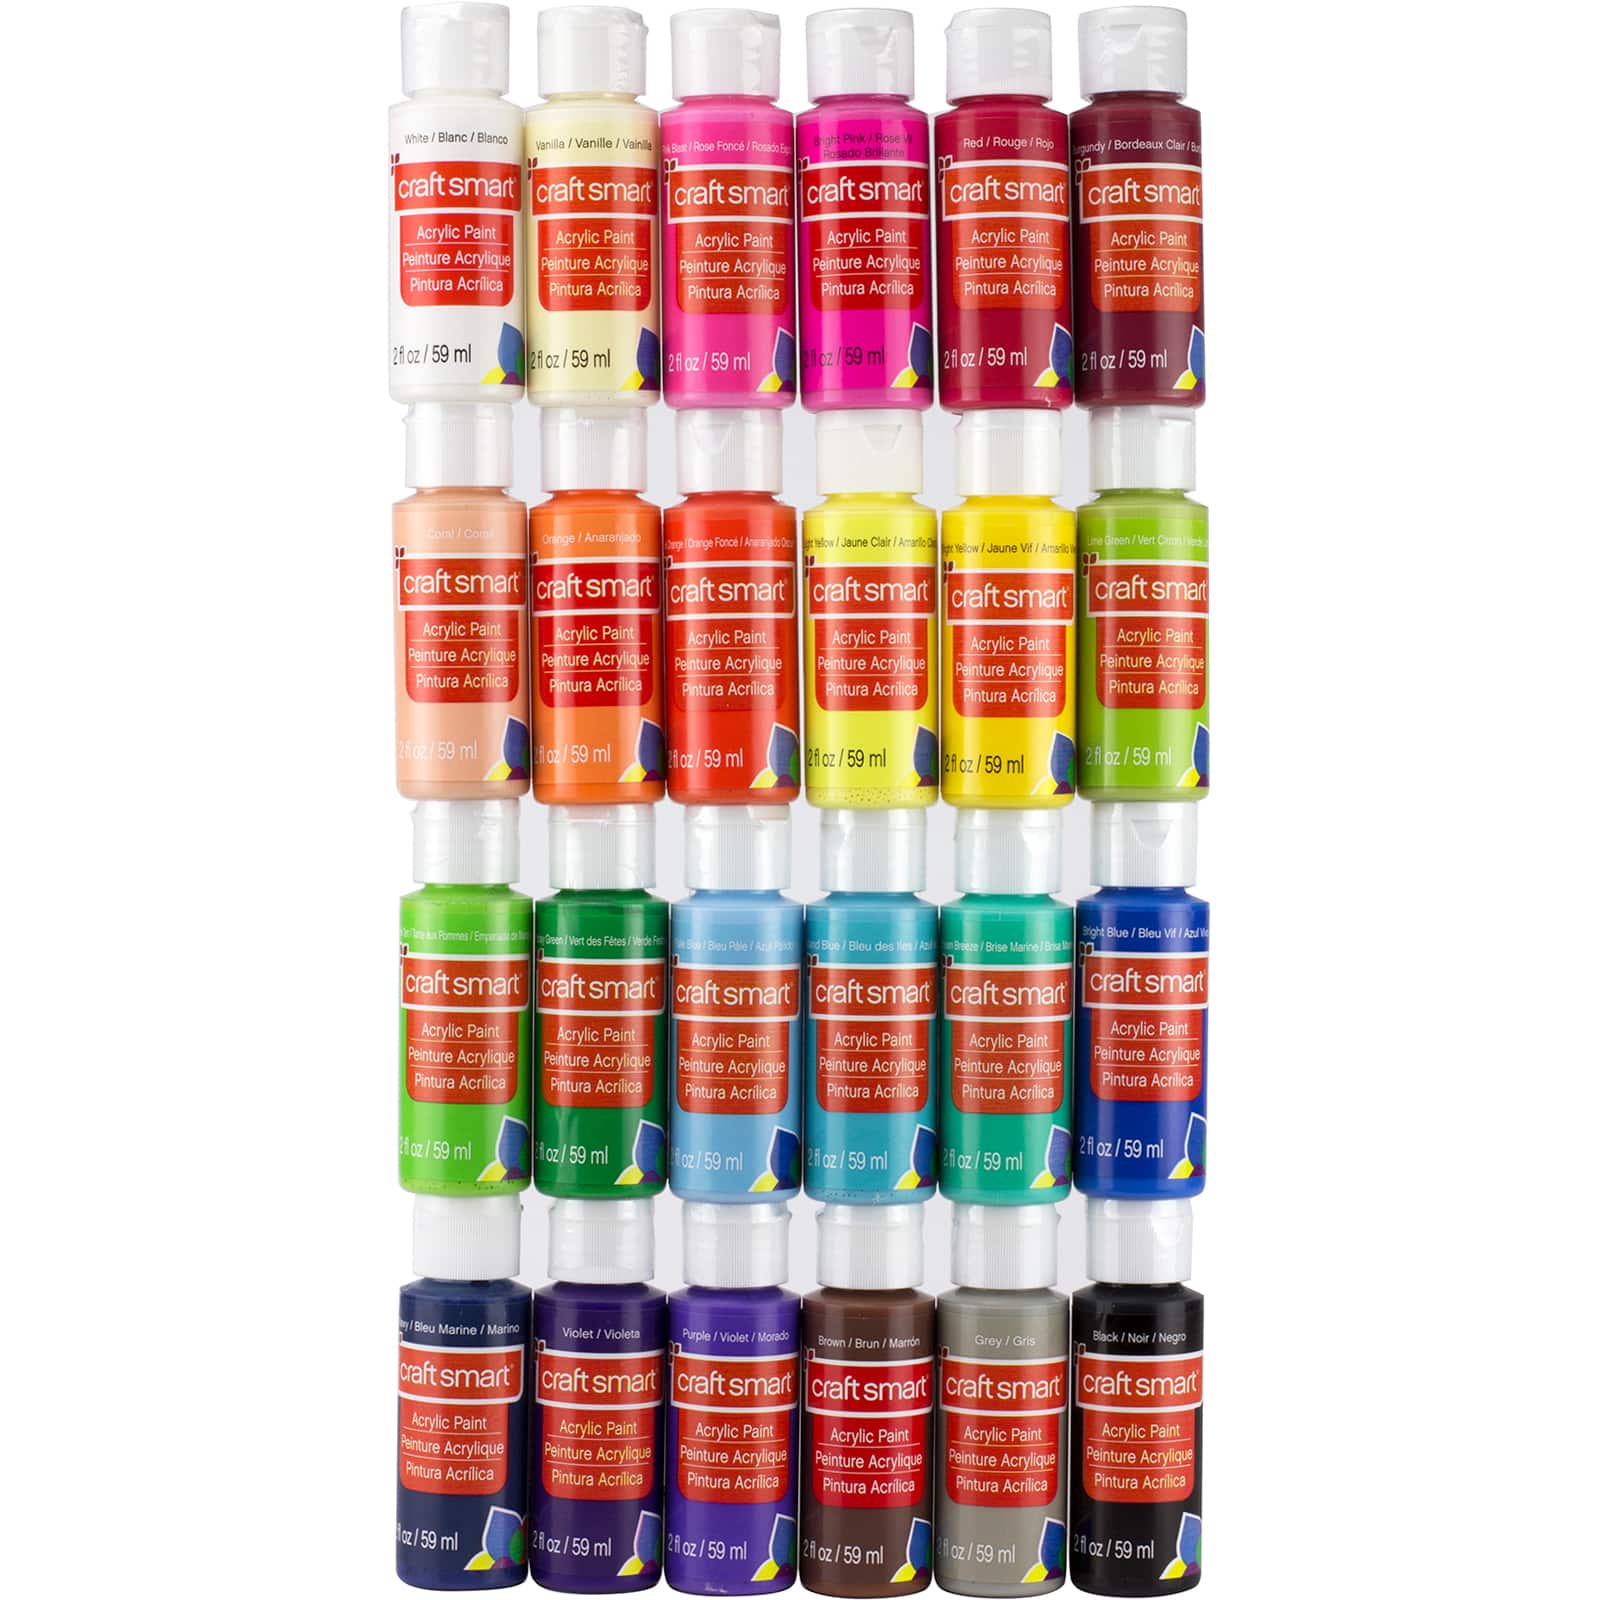 12 Pack: Outdoor Acrylic Paint by Craft Smart®, 2oz. 